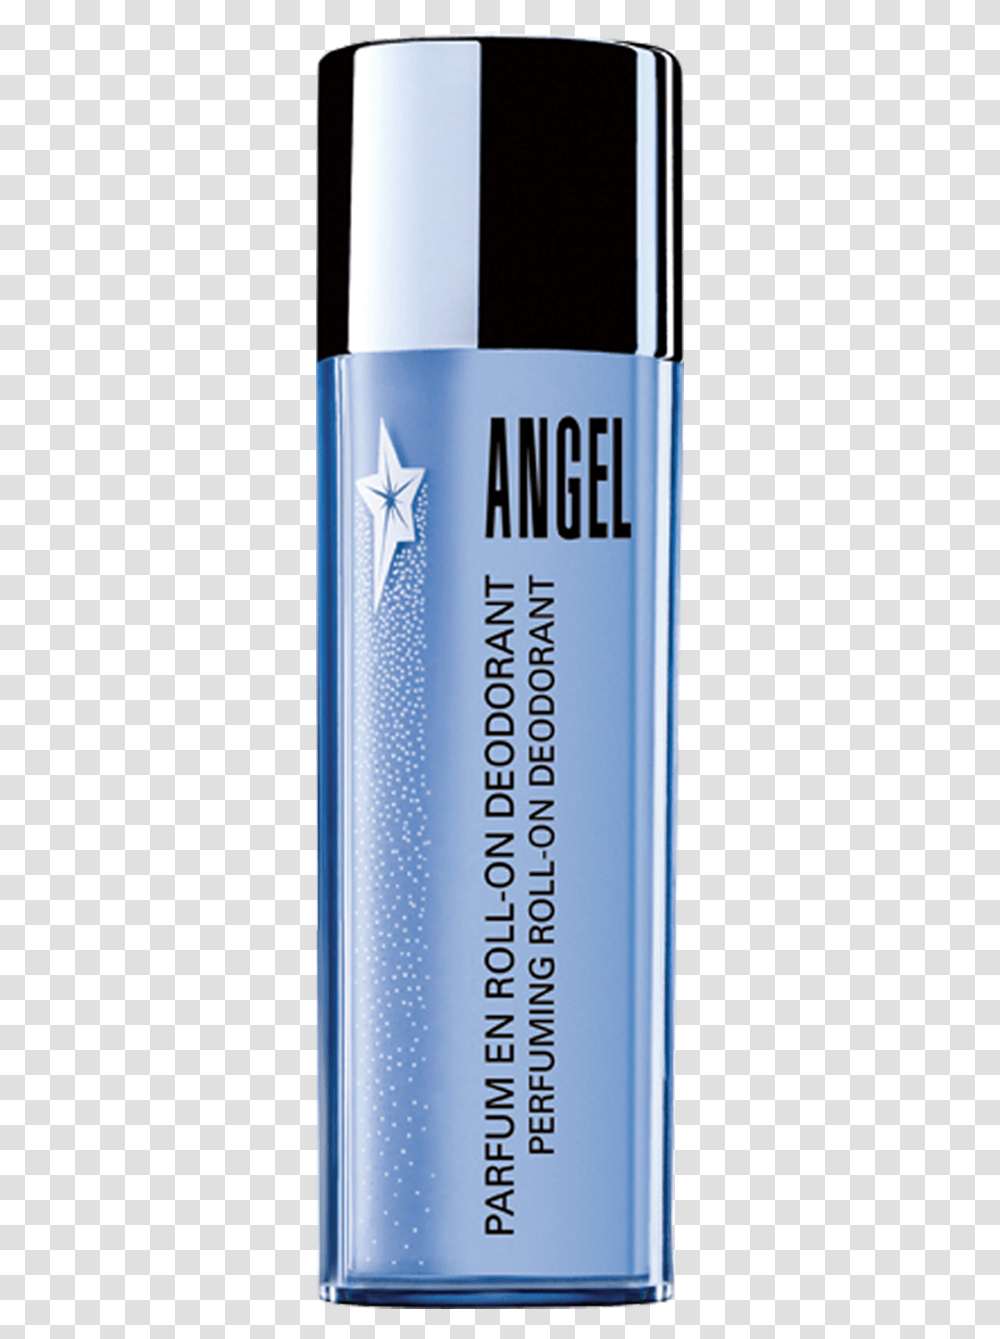 Angel Perfuming Roll On Deodorant Angel Roll On Deodorant, Book, Mobile Phone, Electronics, Bottle Transparent Png